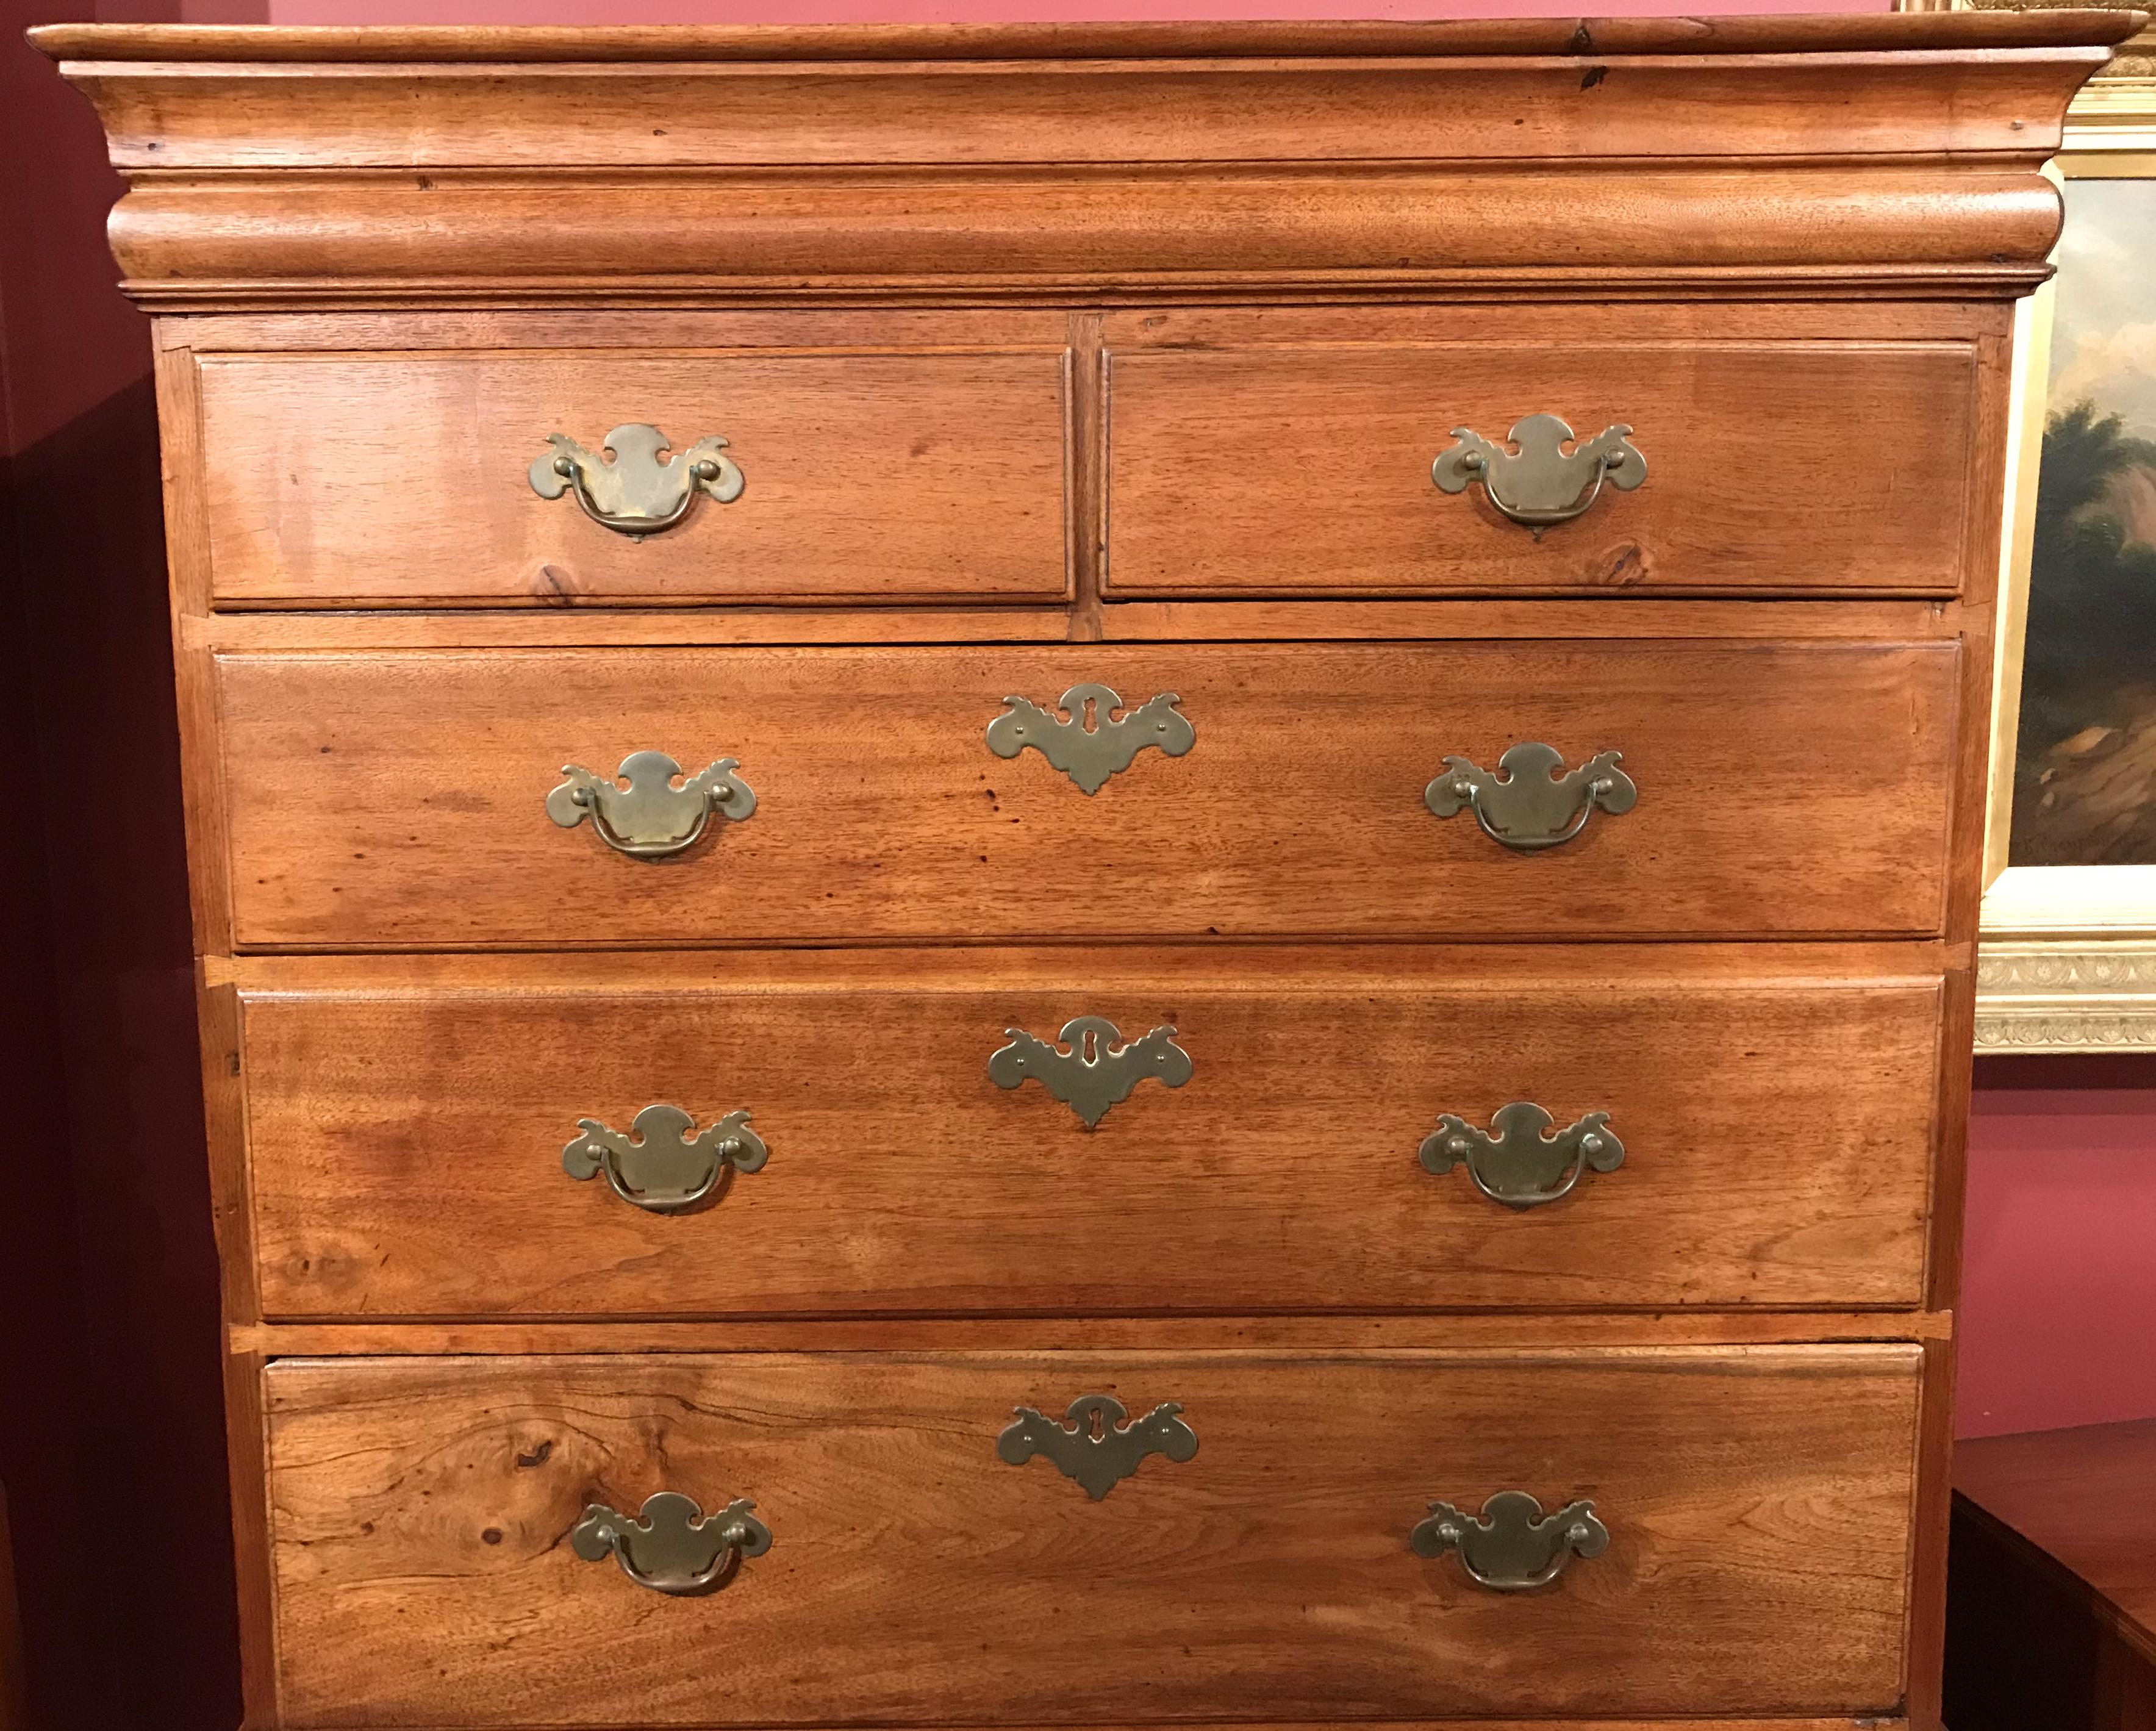 A fine example of a Queen Anne two part flat top walnut highboy, its upper case with a molded cornice surmounting a two over three drawer configuration with what appear to be the original batwing brasses, and a lower case with one long drawer over